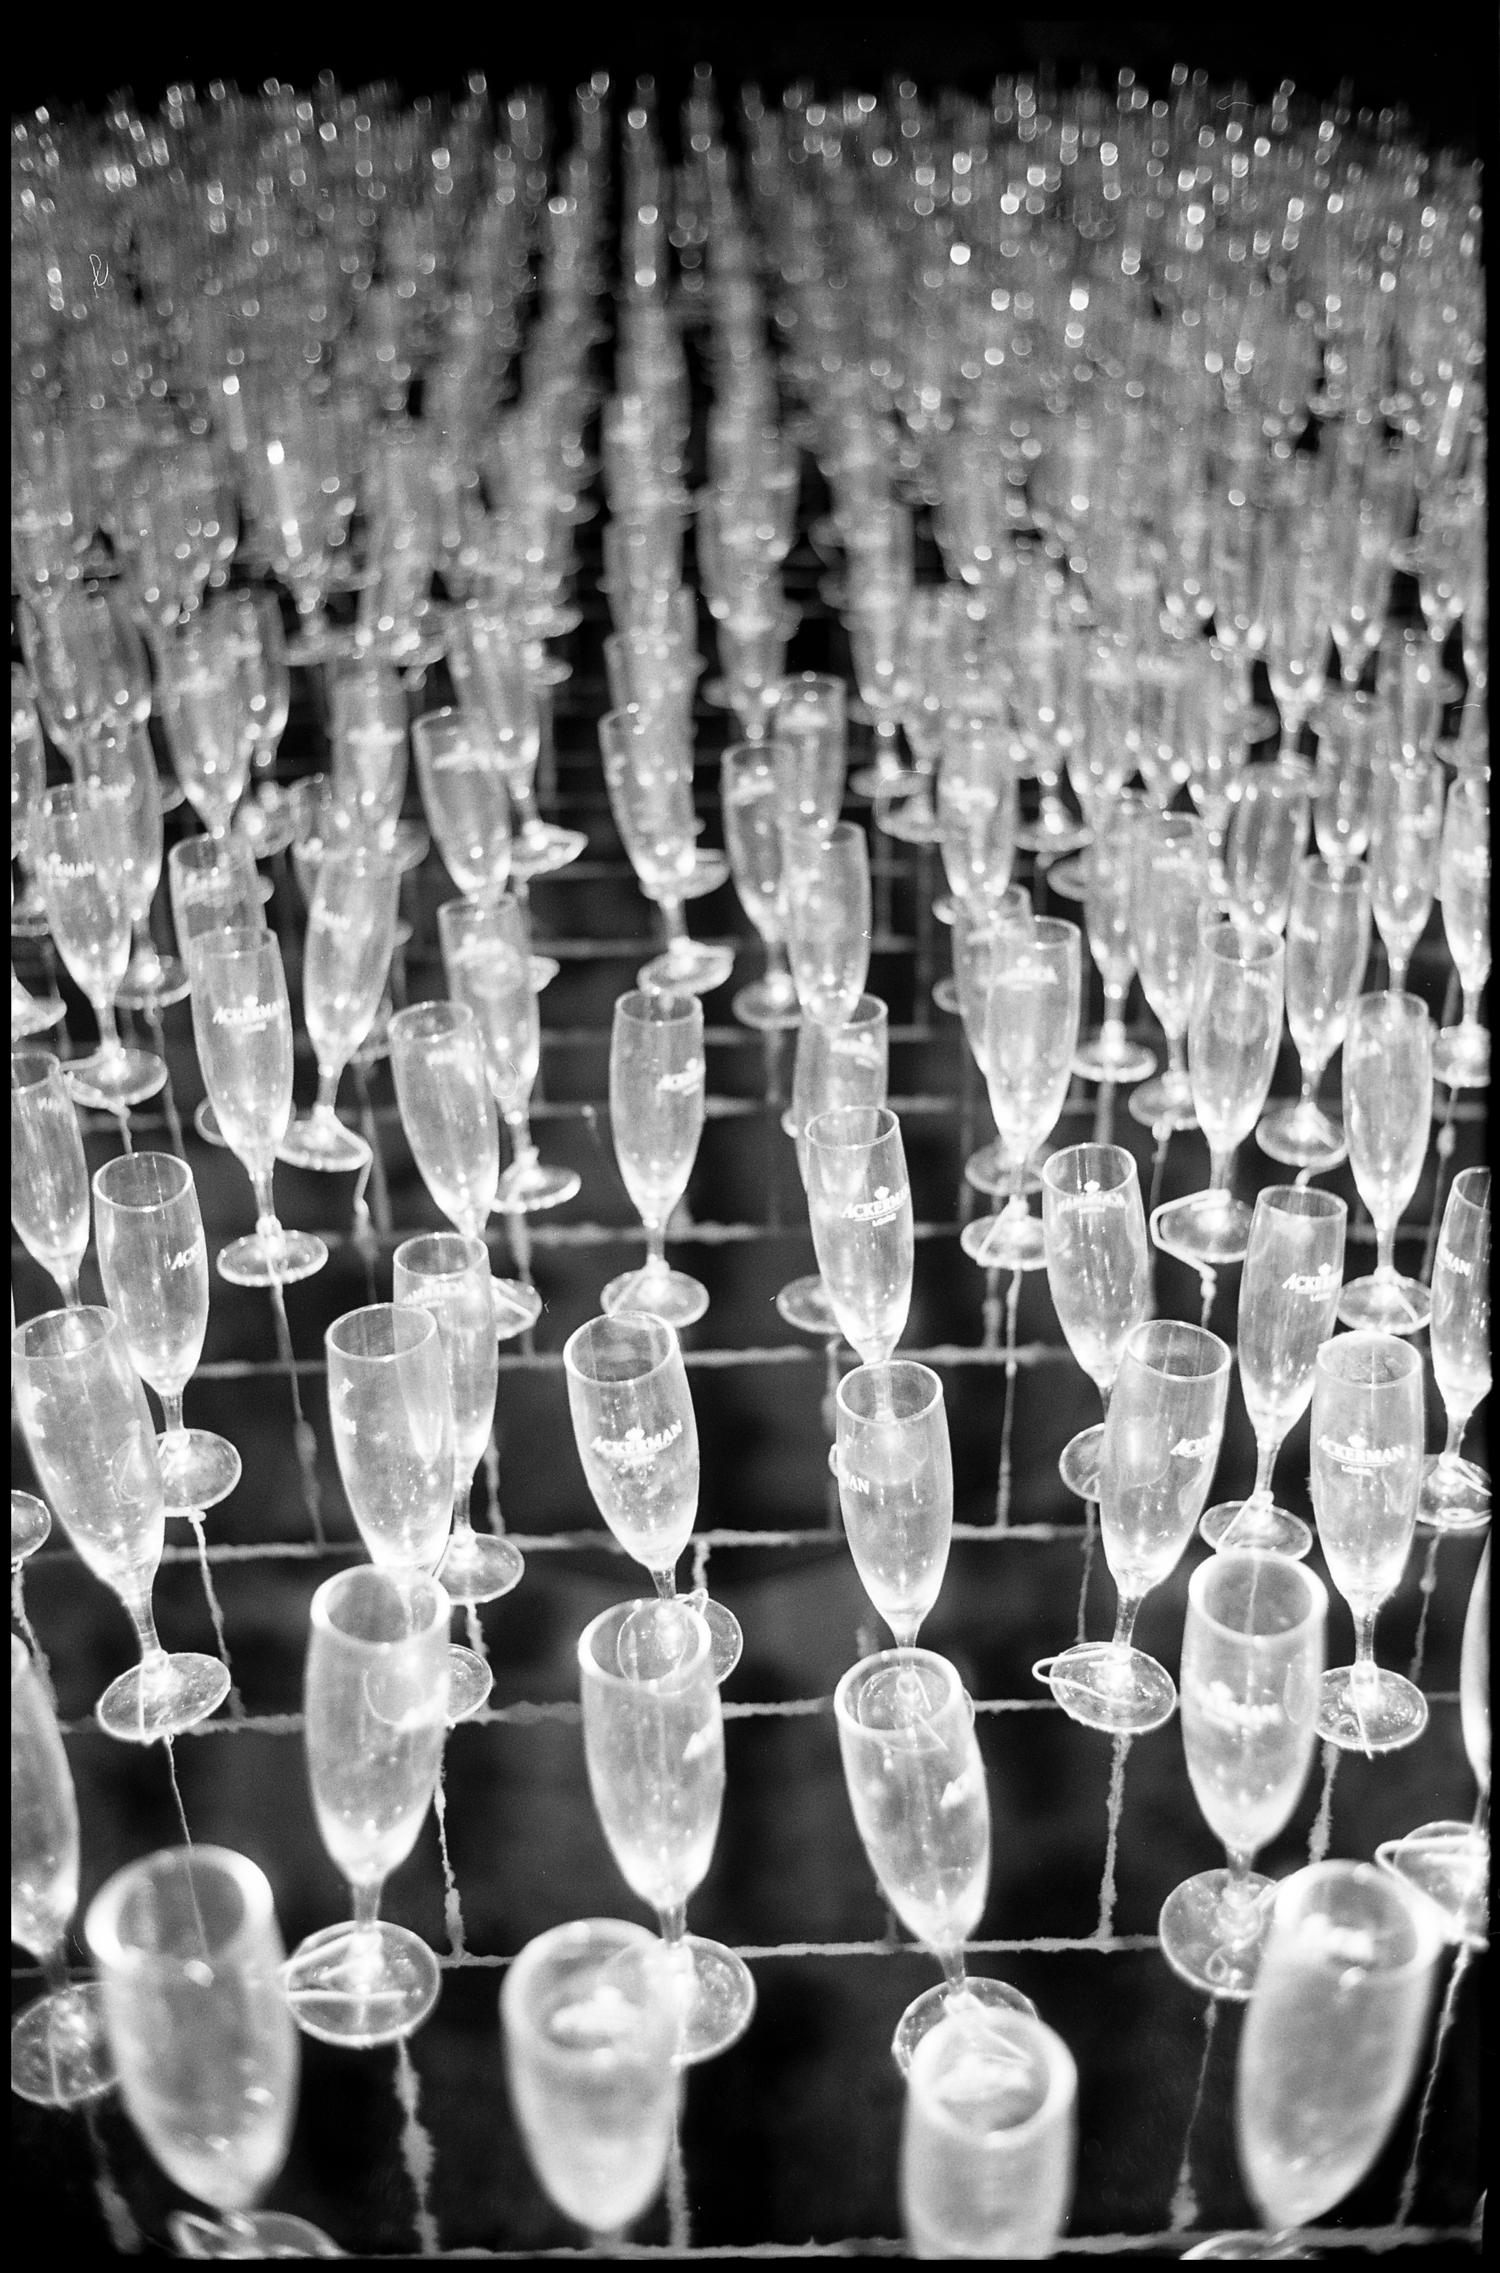 Paul Cooklin Black and White Photograph - Edition 2/10 - Champagne Flutes, Chinon, France, Silver Gelatin Photograph